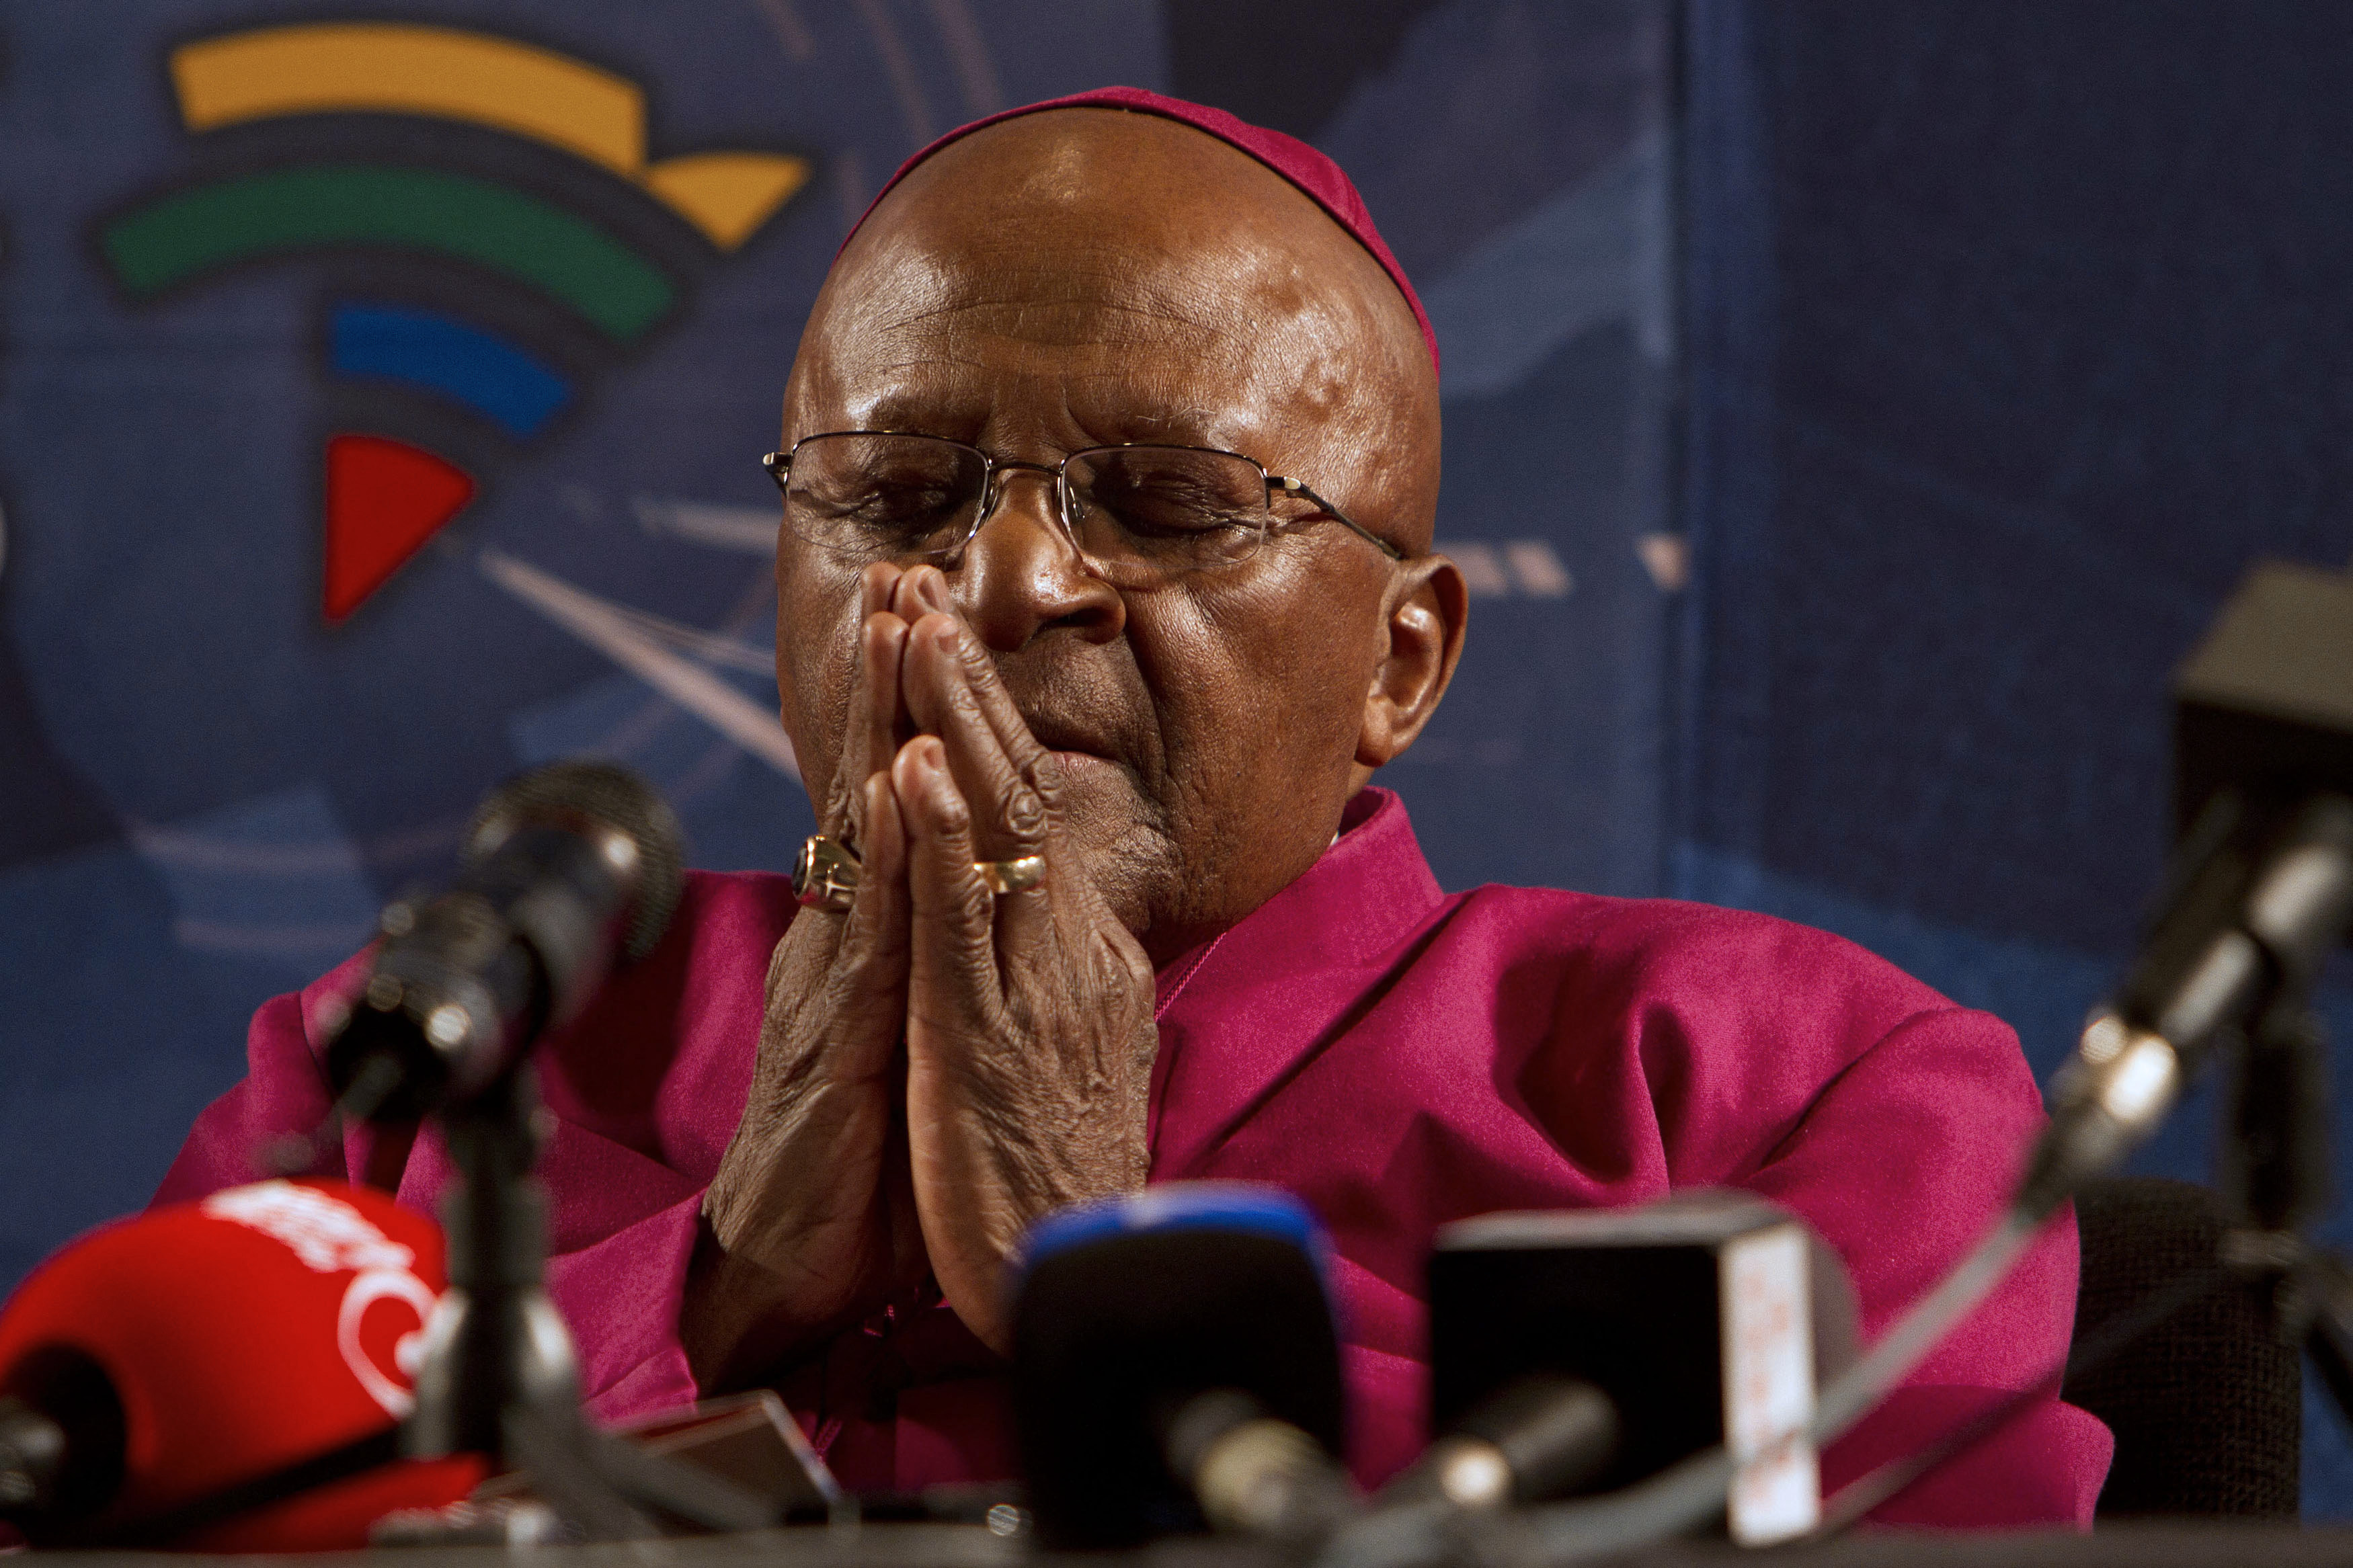 Archbishop Emeritus and Nobel Laureate Desmond Tutu pays tribute to Nelson Mandela during a news conference in Cape Town December 6, 2013. REUTERS/Mark Wessels 